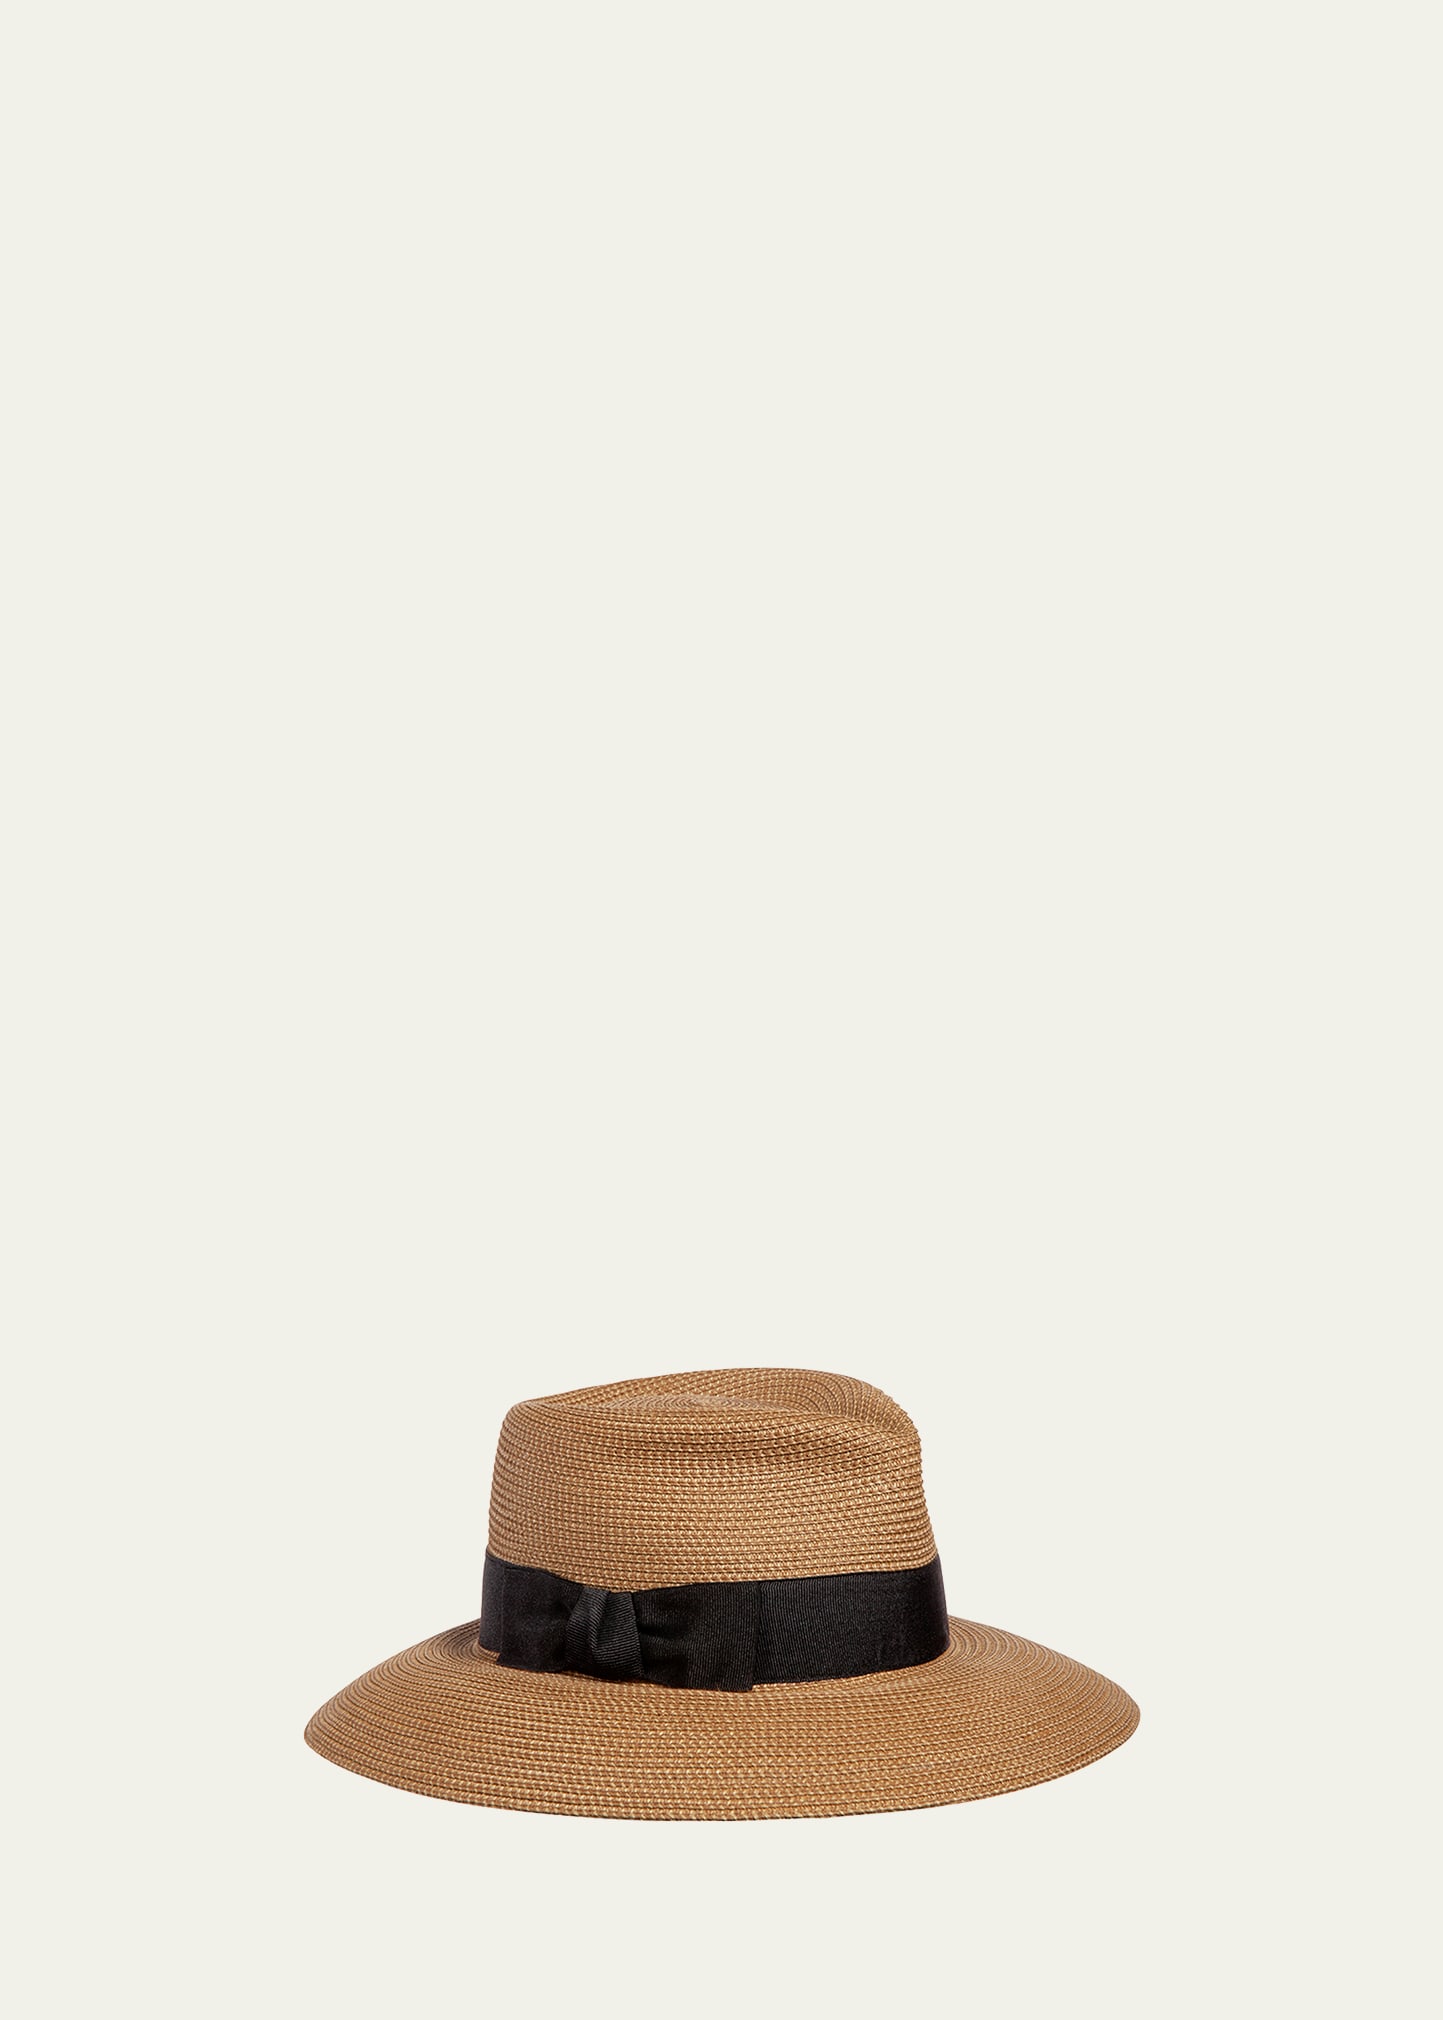 Phoenix Woven Boater Hat, Natural/Black